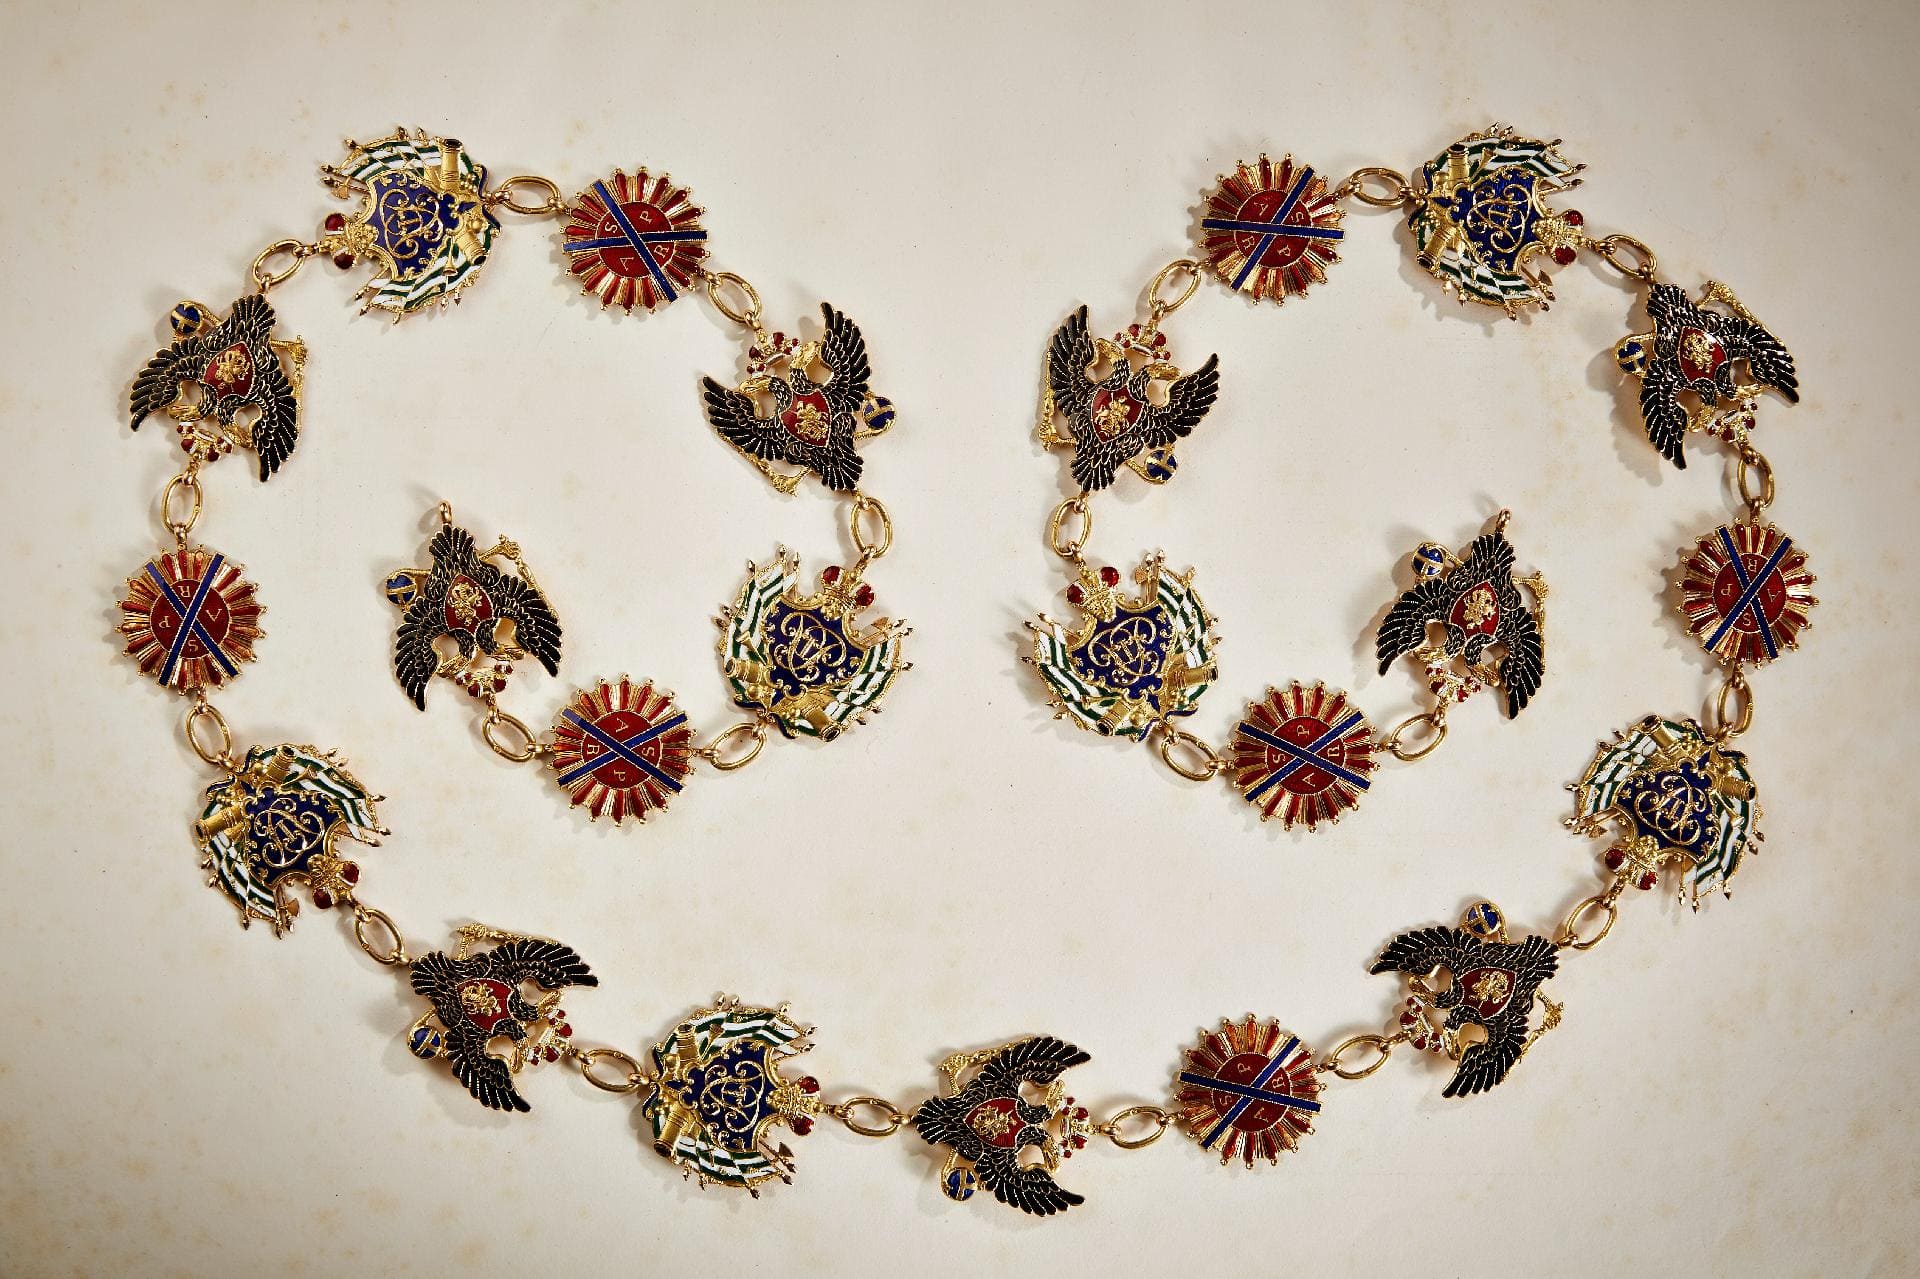 Order of Saint Andrew Collar with 23 links made by Immanuel Pannasch in 1831.jpg